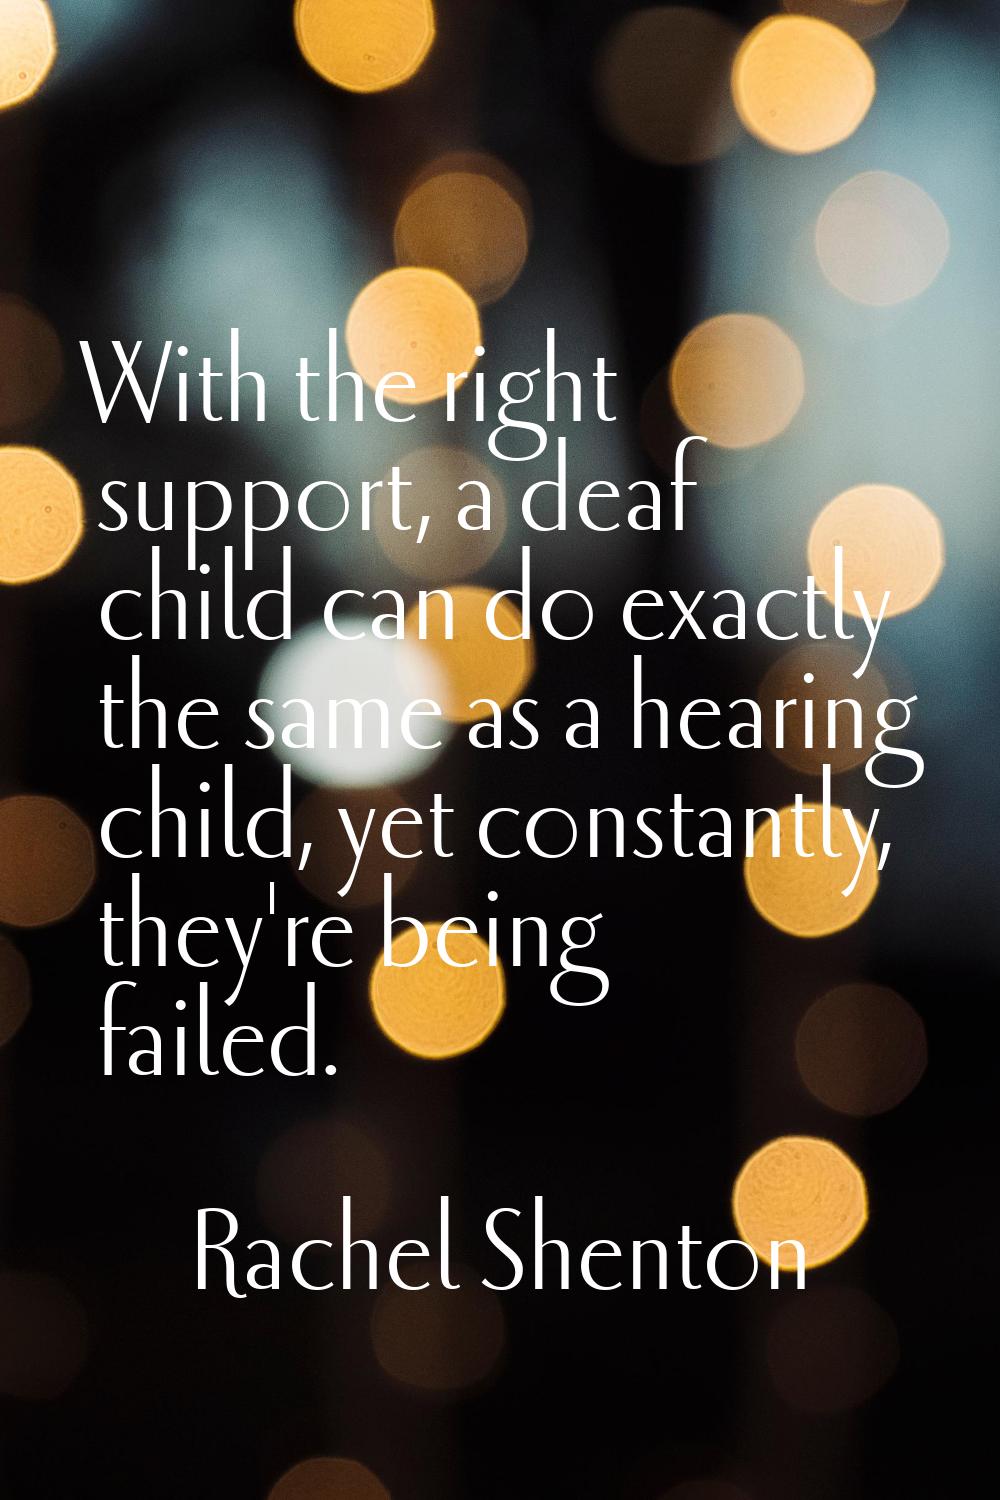 With the right support, a deaf child can do exactly the same as a hearing child, yet constantly, th